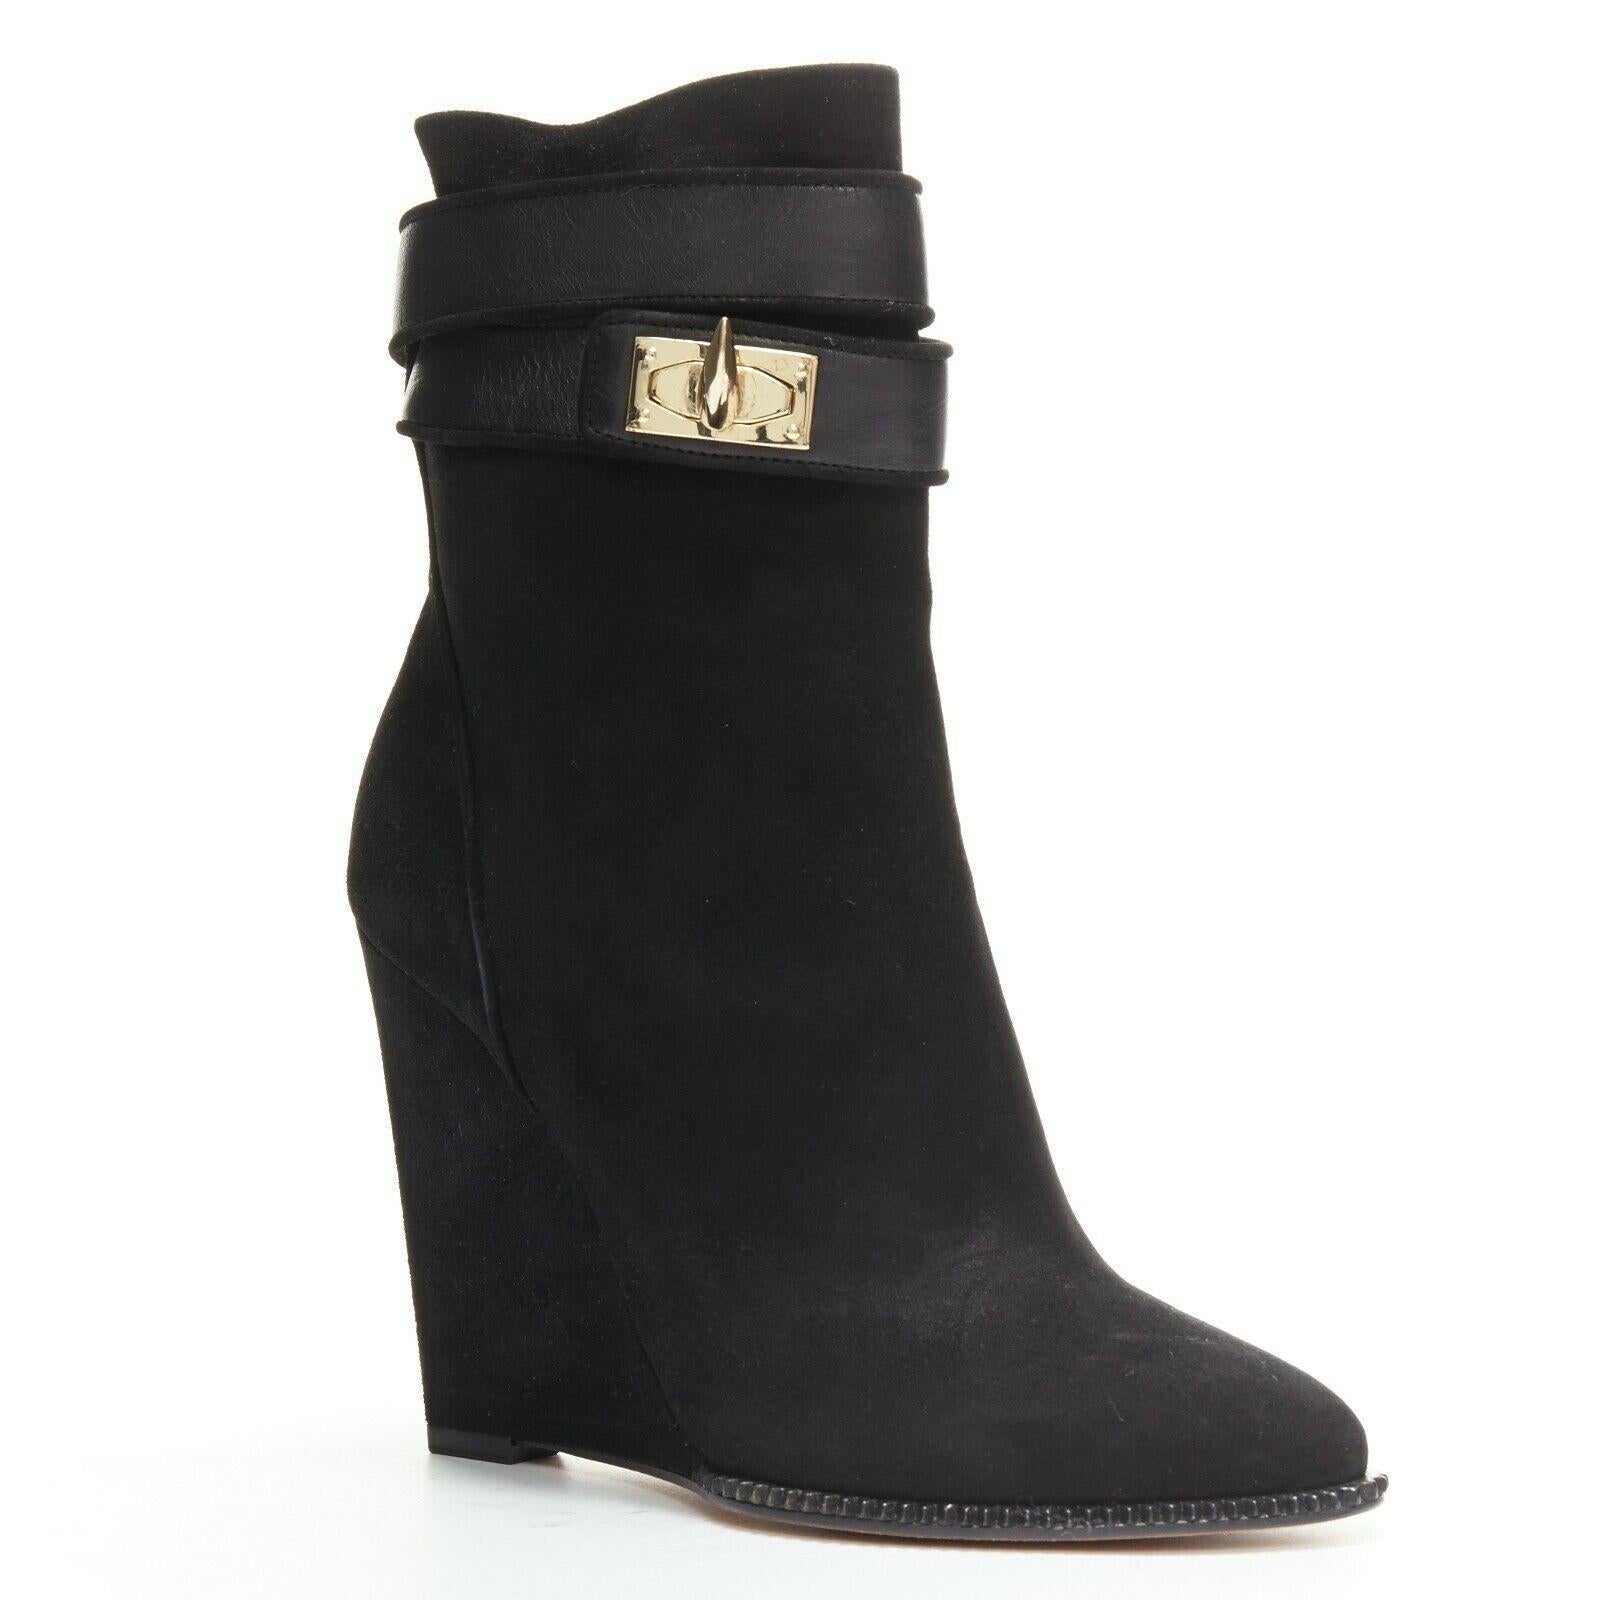 GIVENCHY black suede gold shark tooth lock clasp closure wedge booties EU36.5
GIVENCHY BY RICCARDO TISCI
Shark tooth lock. 
Black suede upper. 
Wedged heel. 
Ankle booties. 
Gold-tone shark tooth twist lock closure. 
Pointed toe. 
Ridged detailing